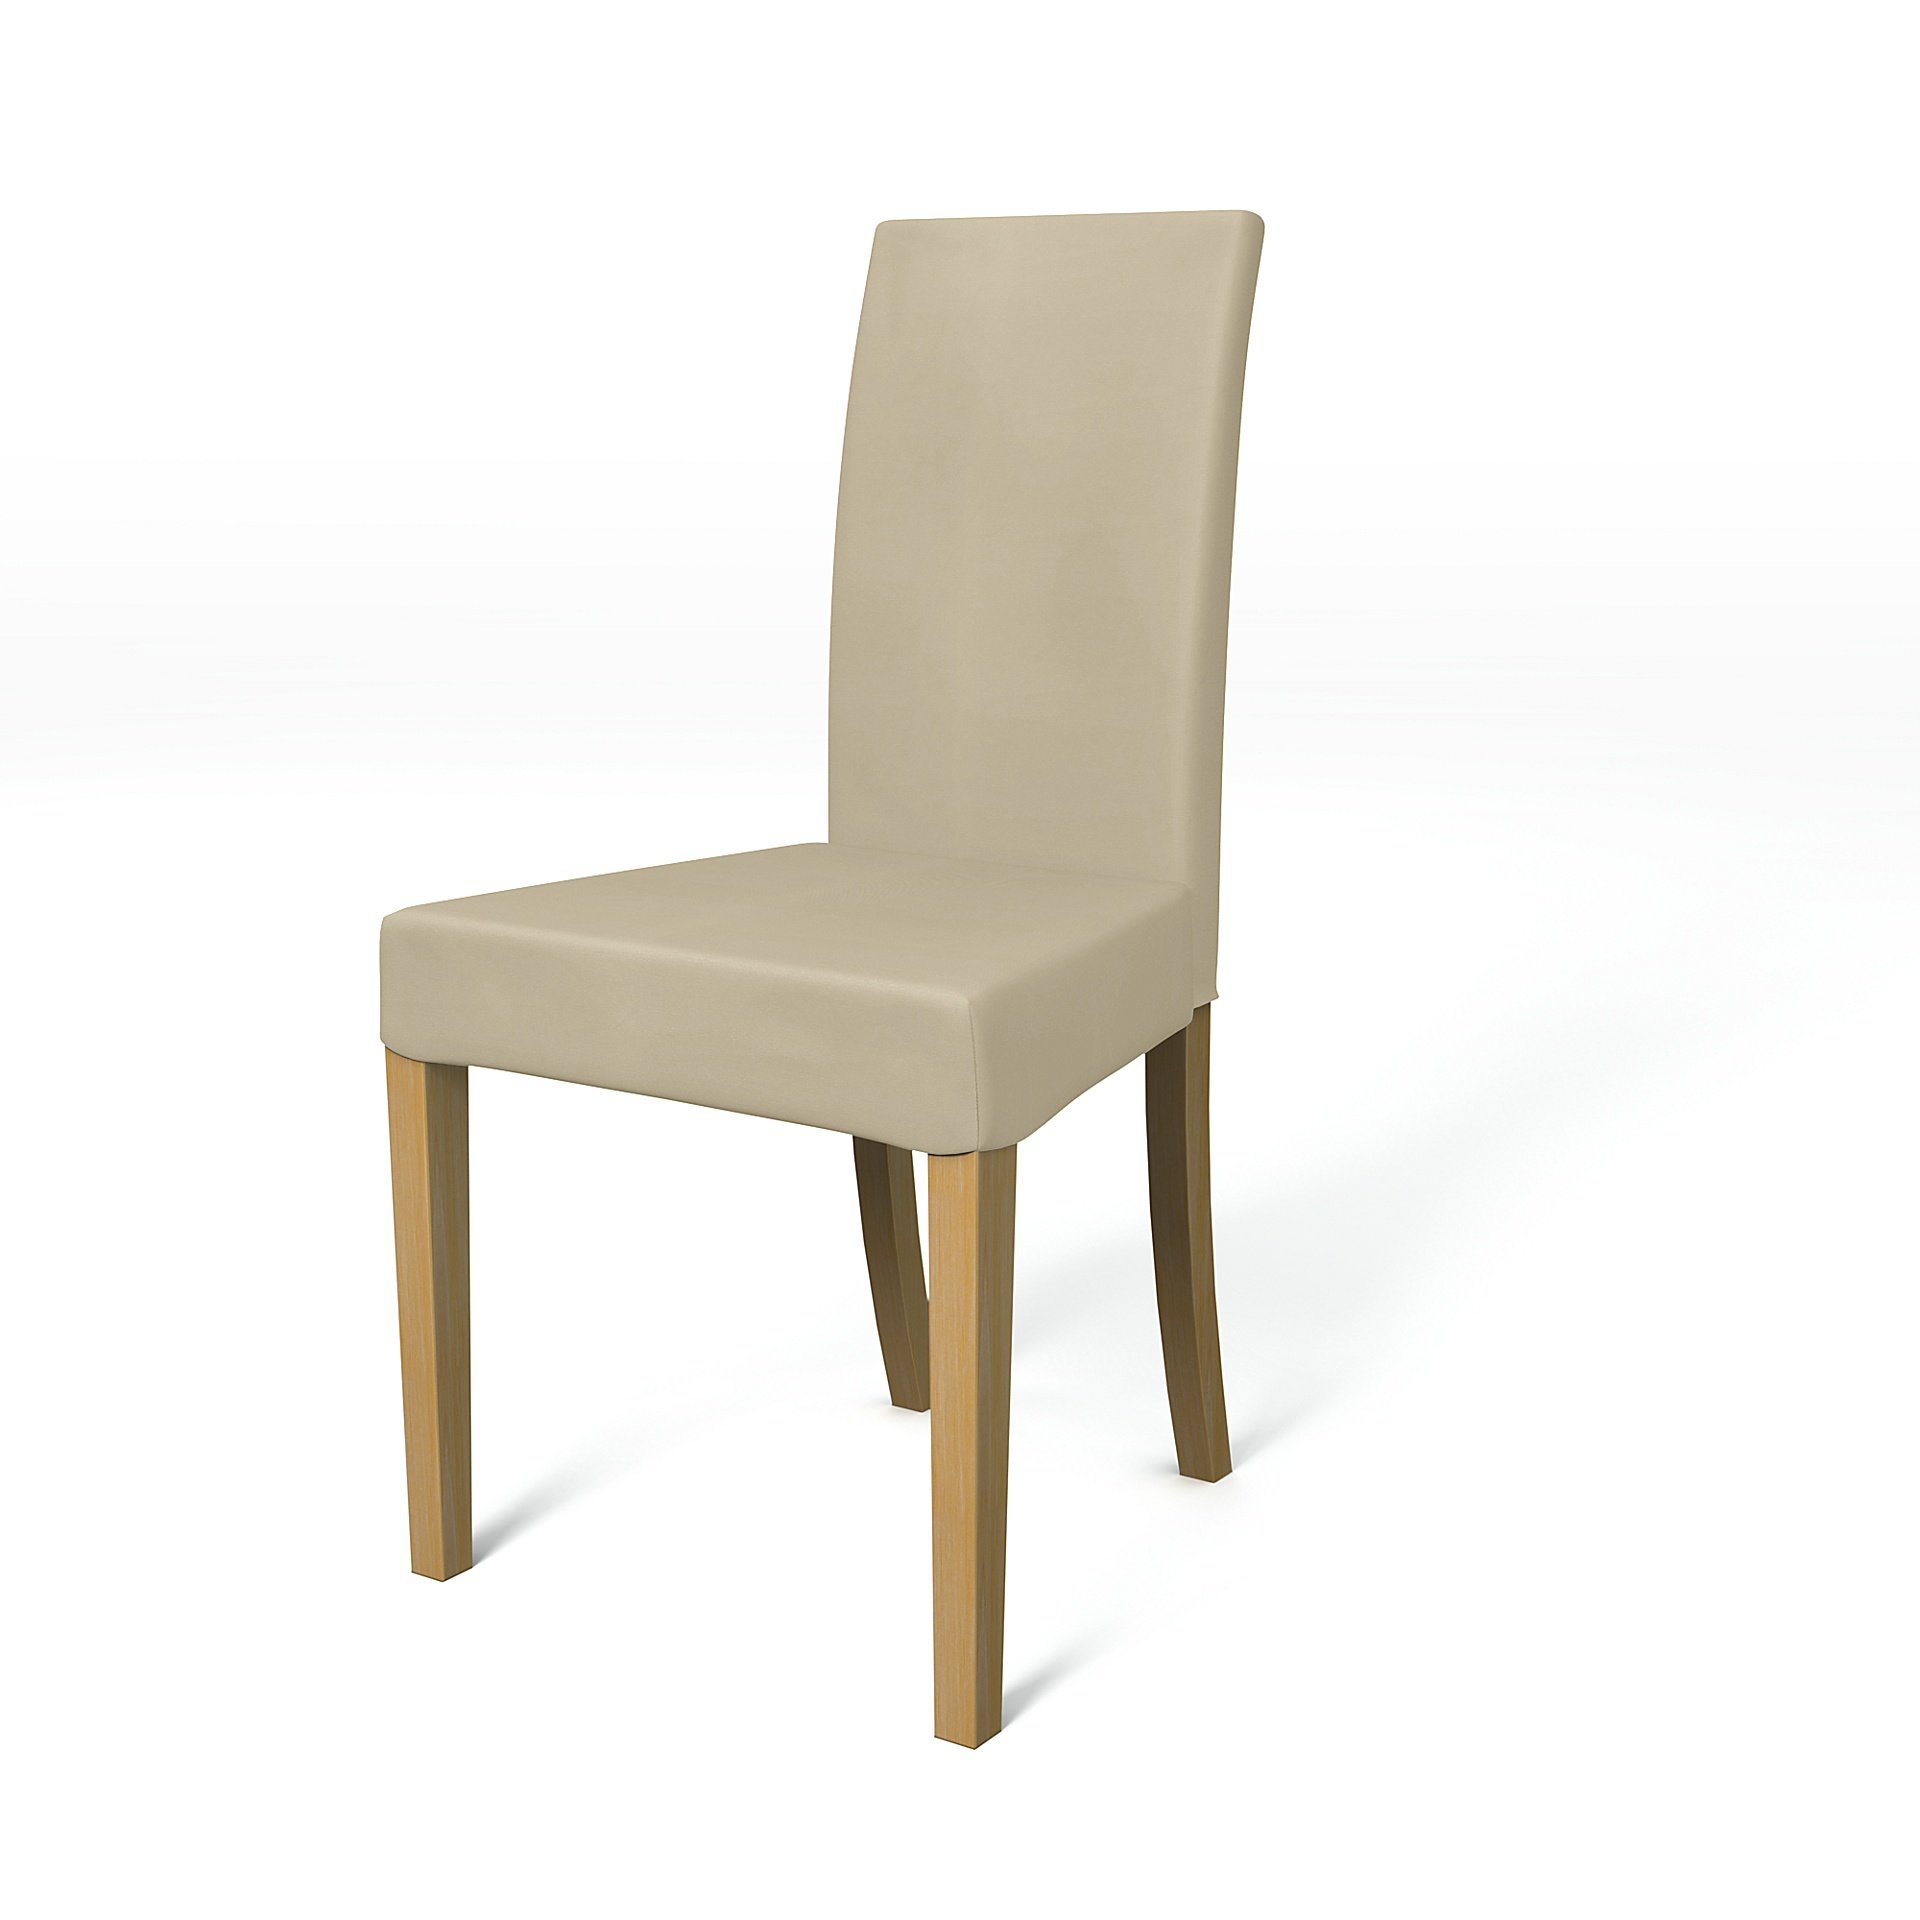 IKEA - Harry Dining Chair Cover, Sand Beige, Cotton - Bemz